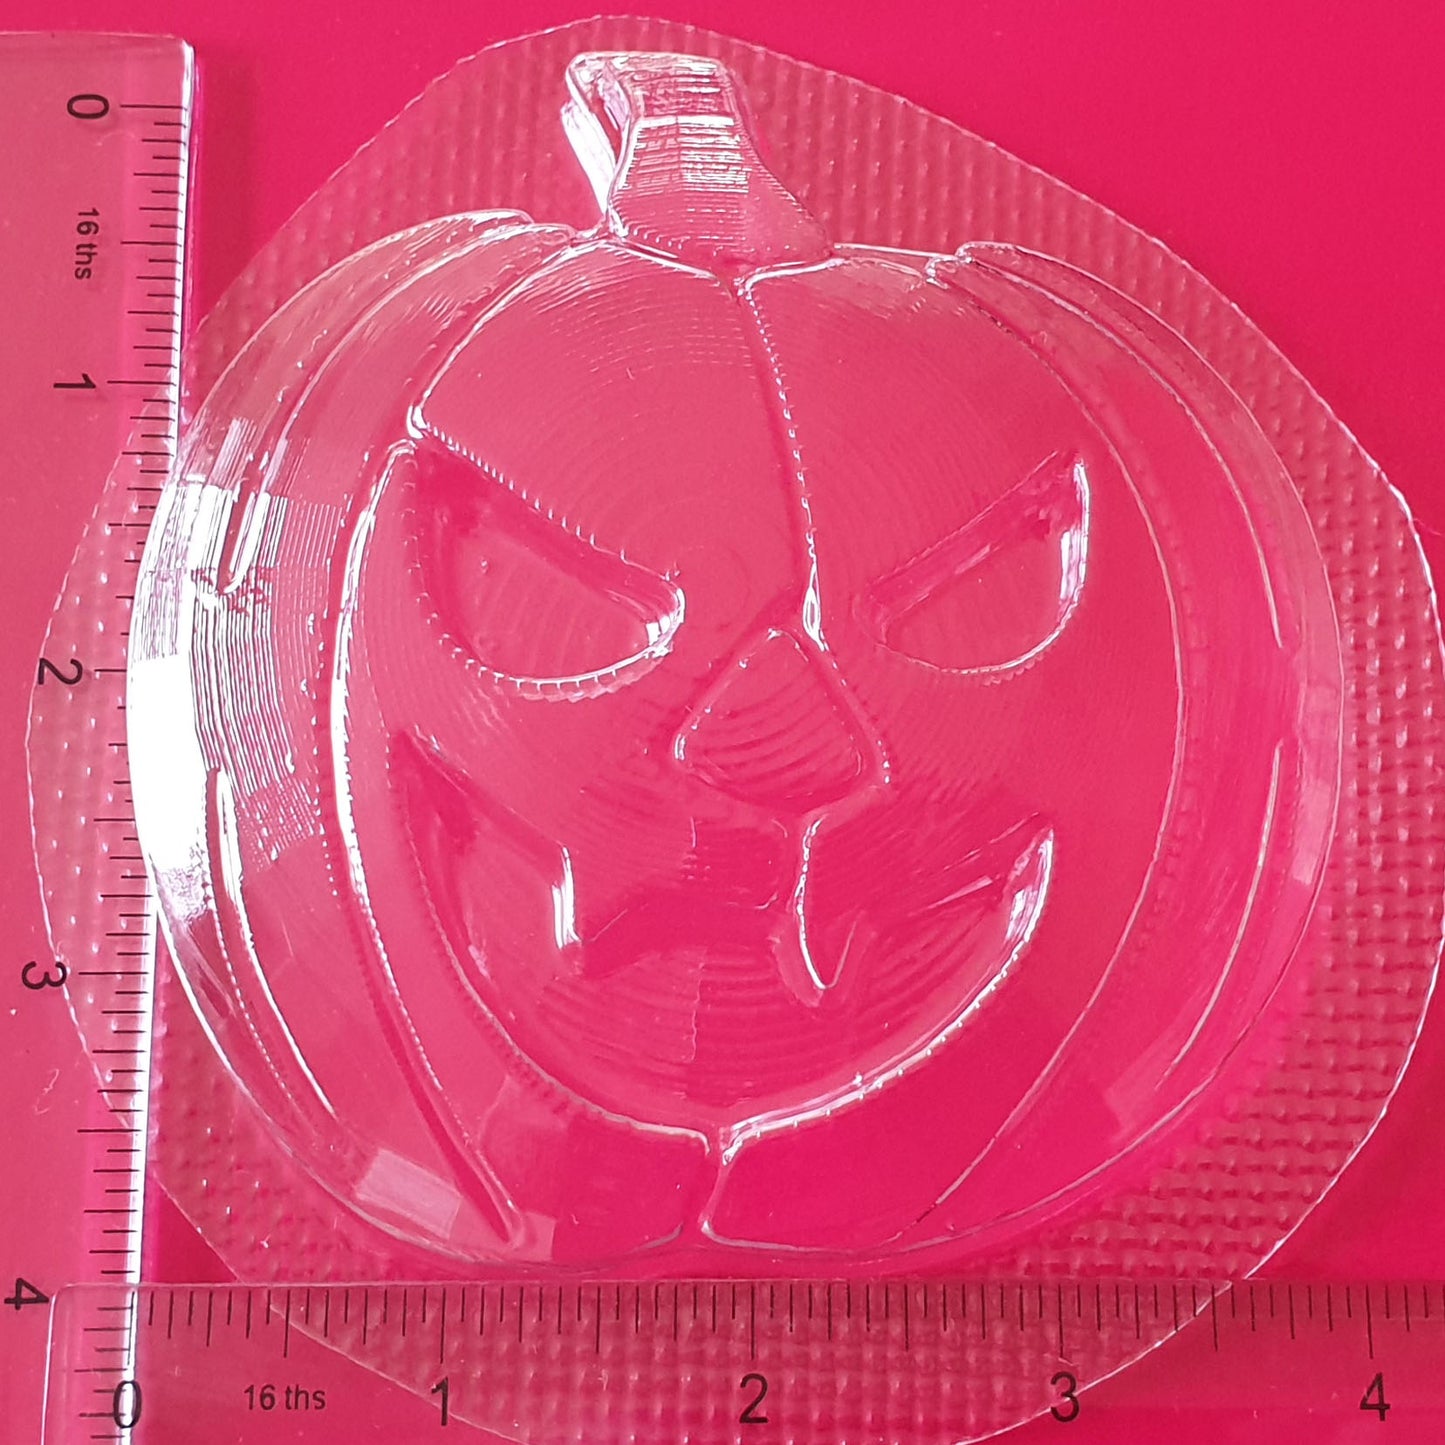 Pumpkin Mould | Truly Personal | Bath Bomb, Soap, Resin, Chocolate, Jelly, Wax Melts Mold